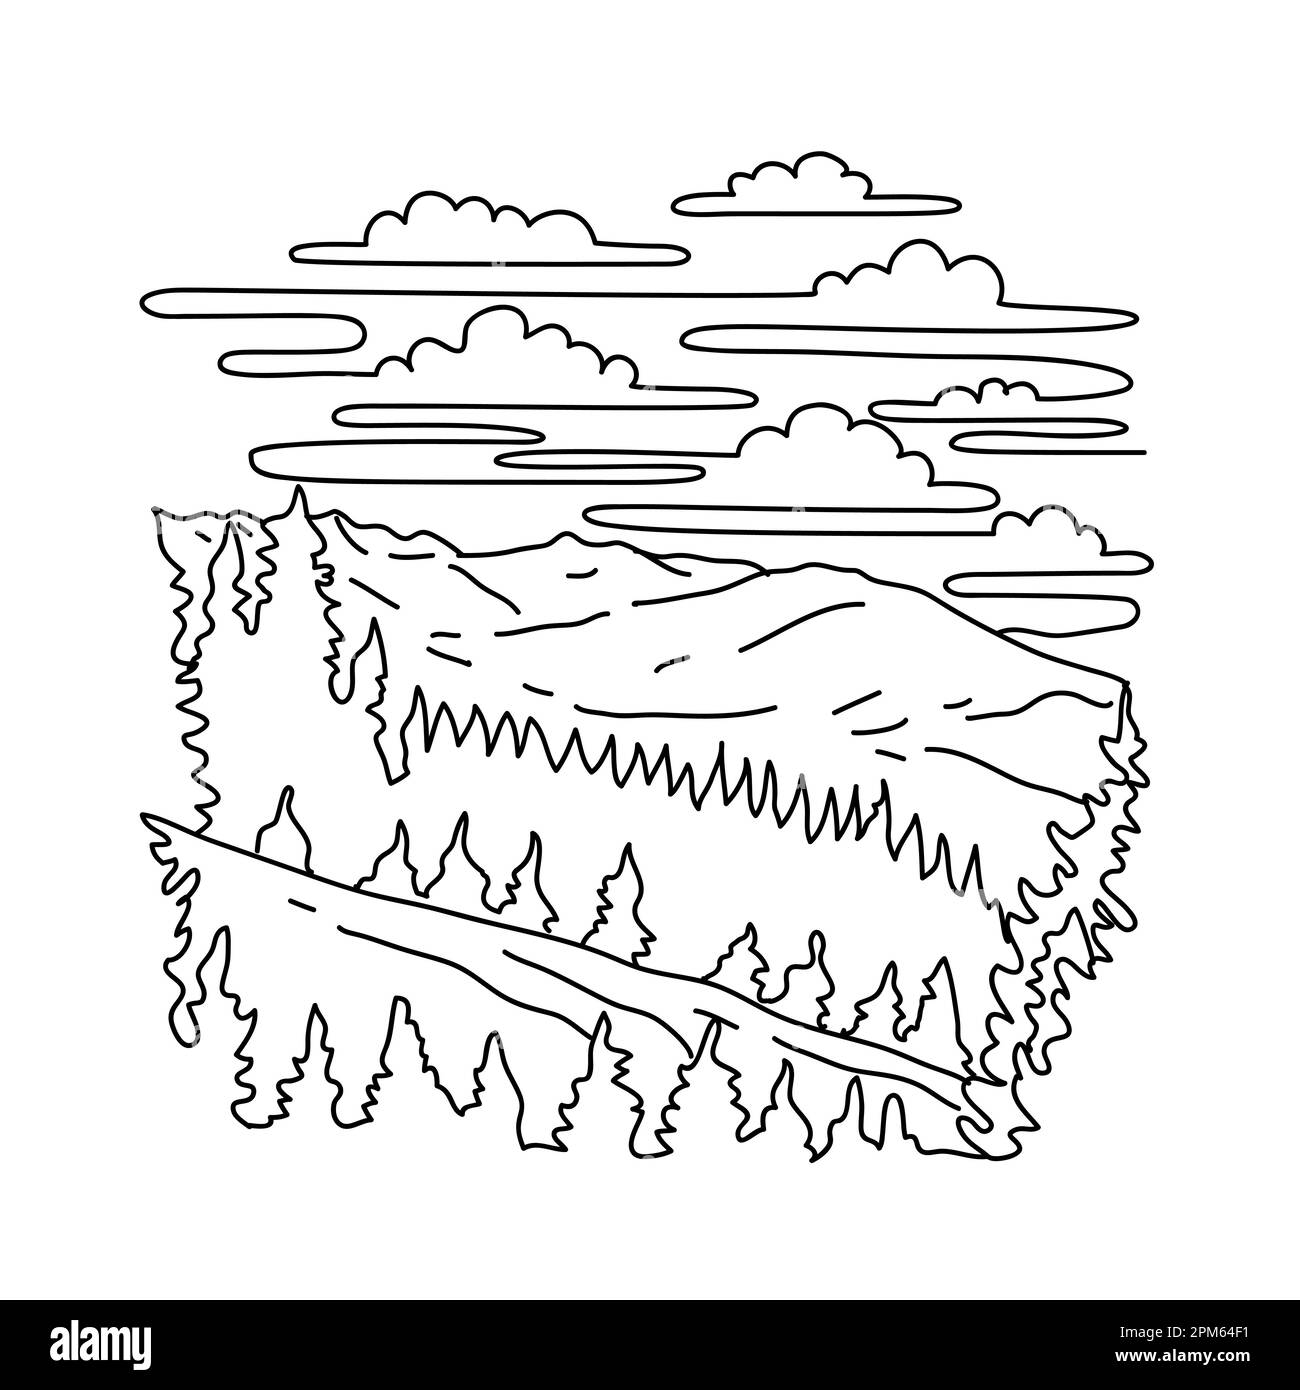 Mono line illustration of Mount Hoffmann in northeastern Mariposa County in the center of Yosemite National Park, California, United States done in bl Stock Photo